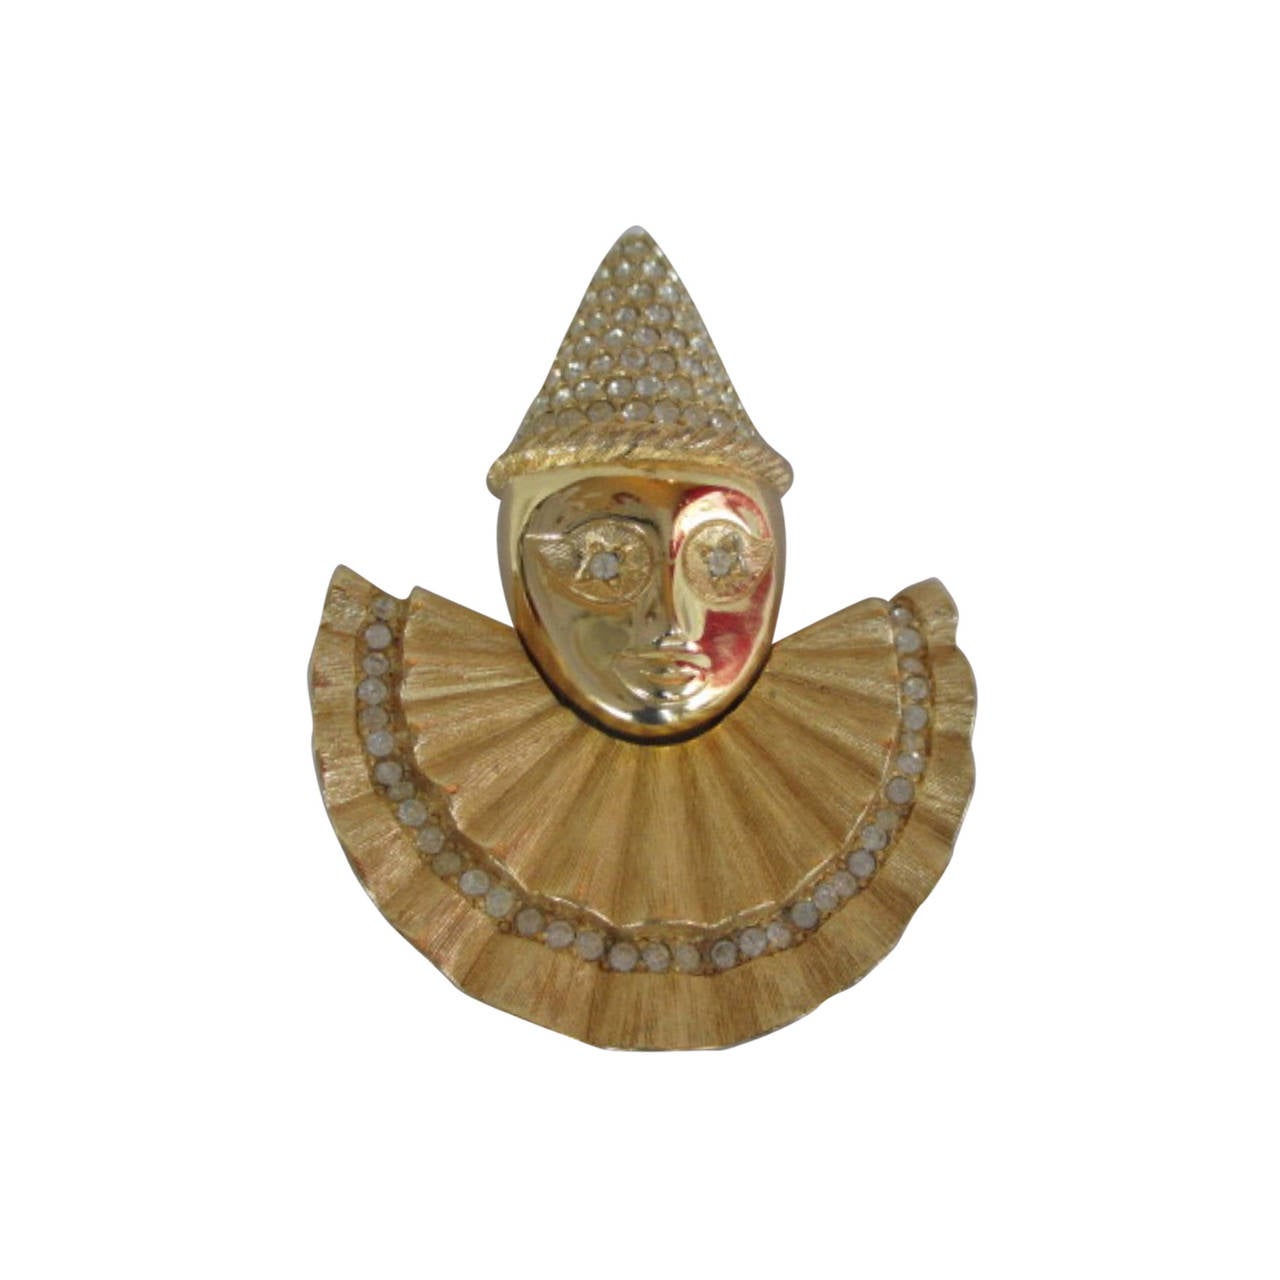 Gorgeous clown brooch from the 1980s by Maison CHRISTIAN DIOR.